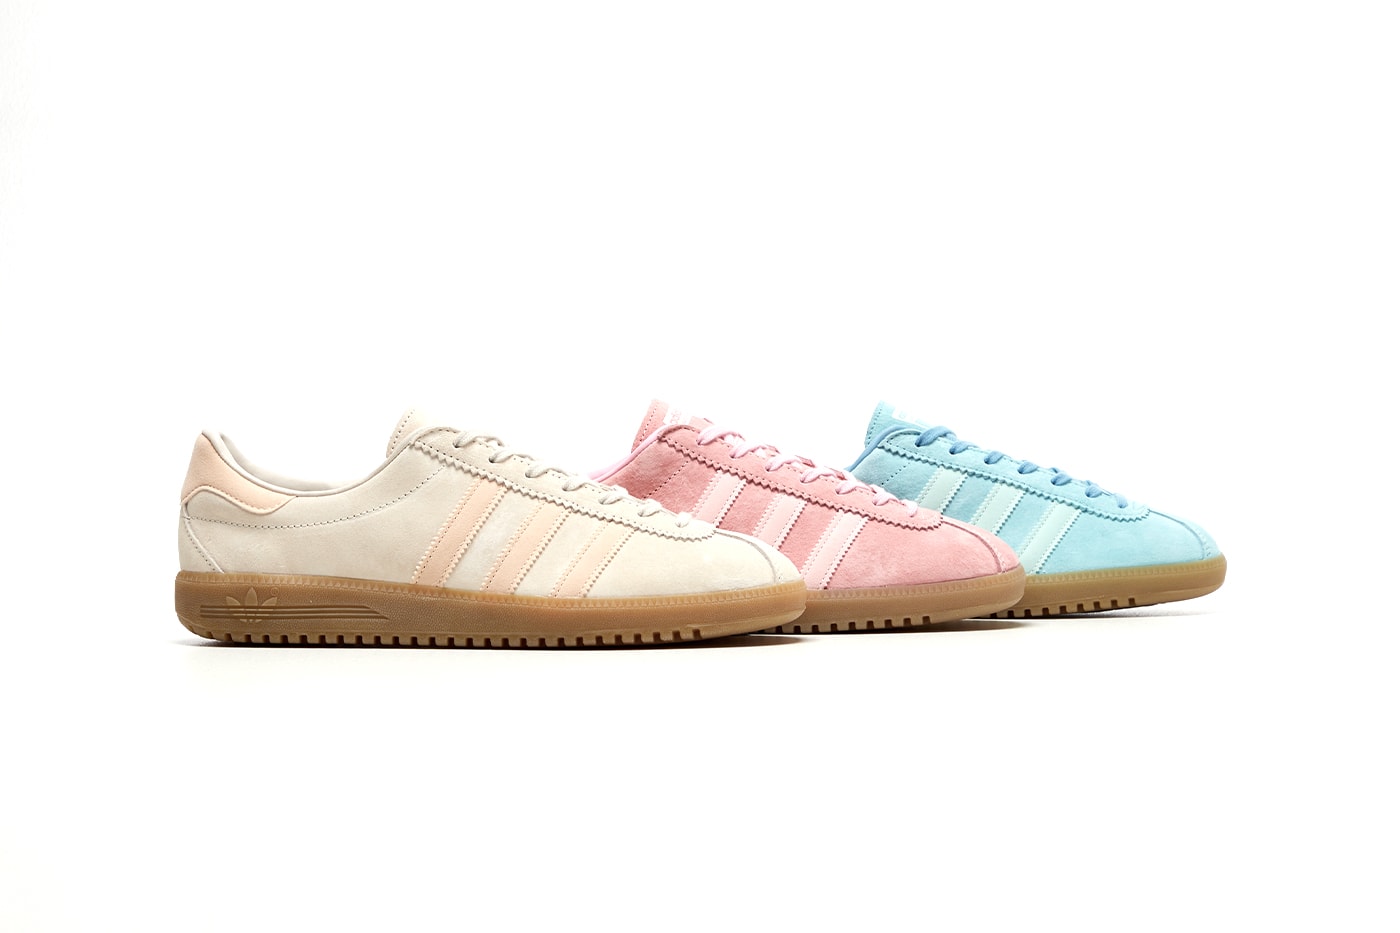 New Adidas Bermuda Shoes Sneakers - Glow Pink (GY7386)